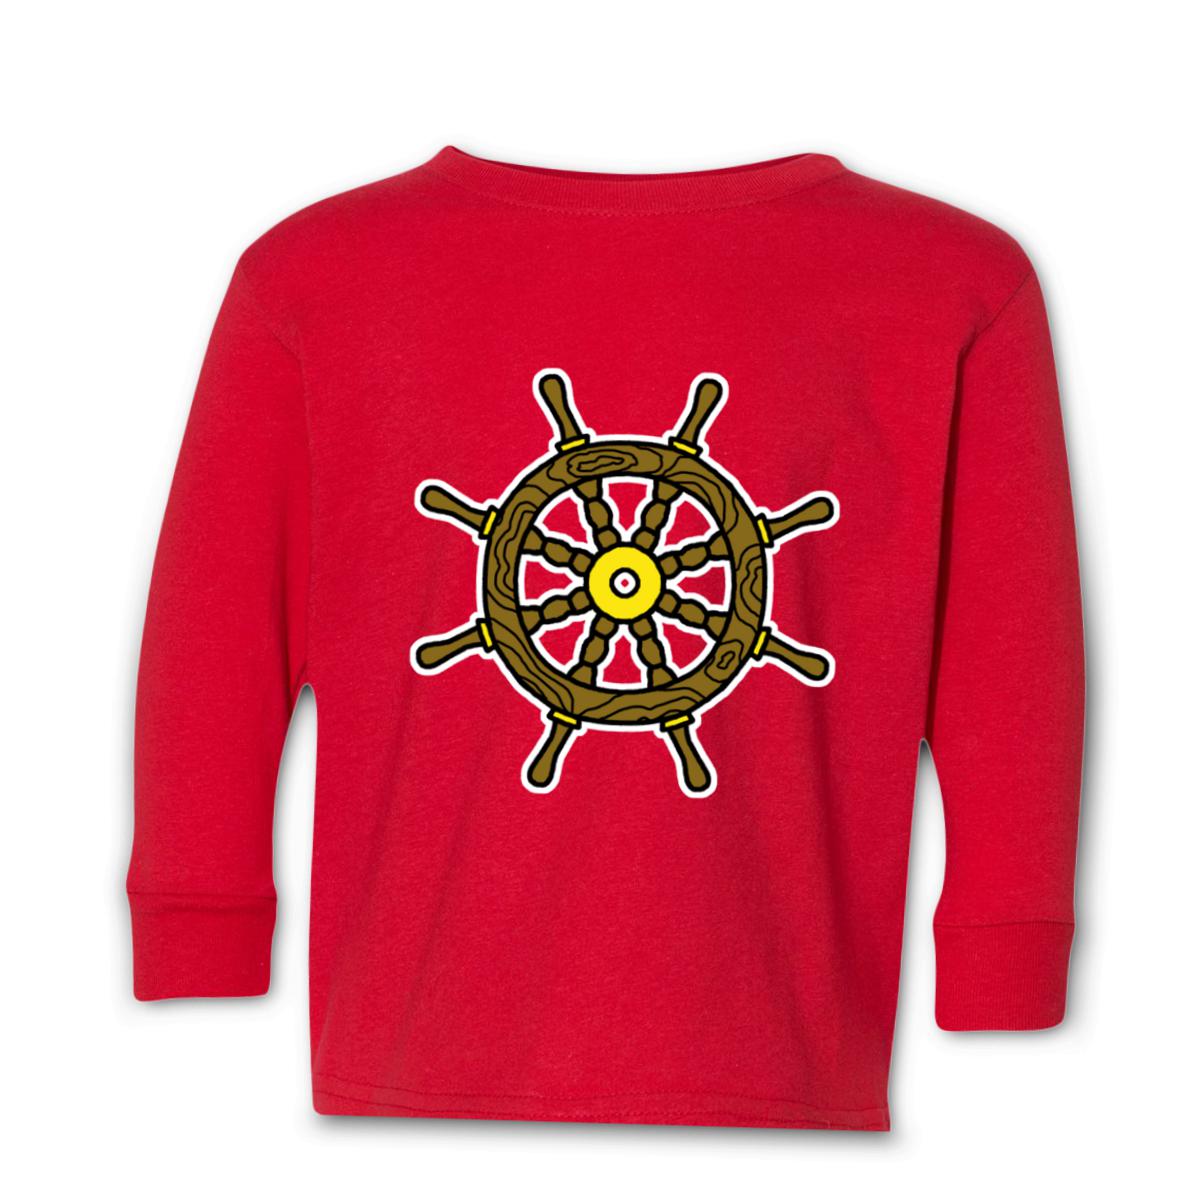 American Traditional Ship Wheel Toddler Long Sleeve Tee 4T red